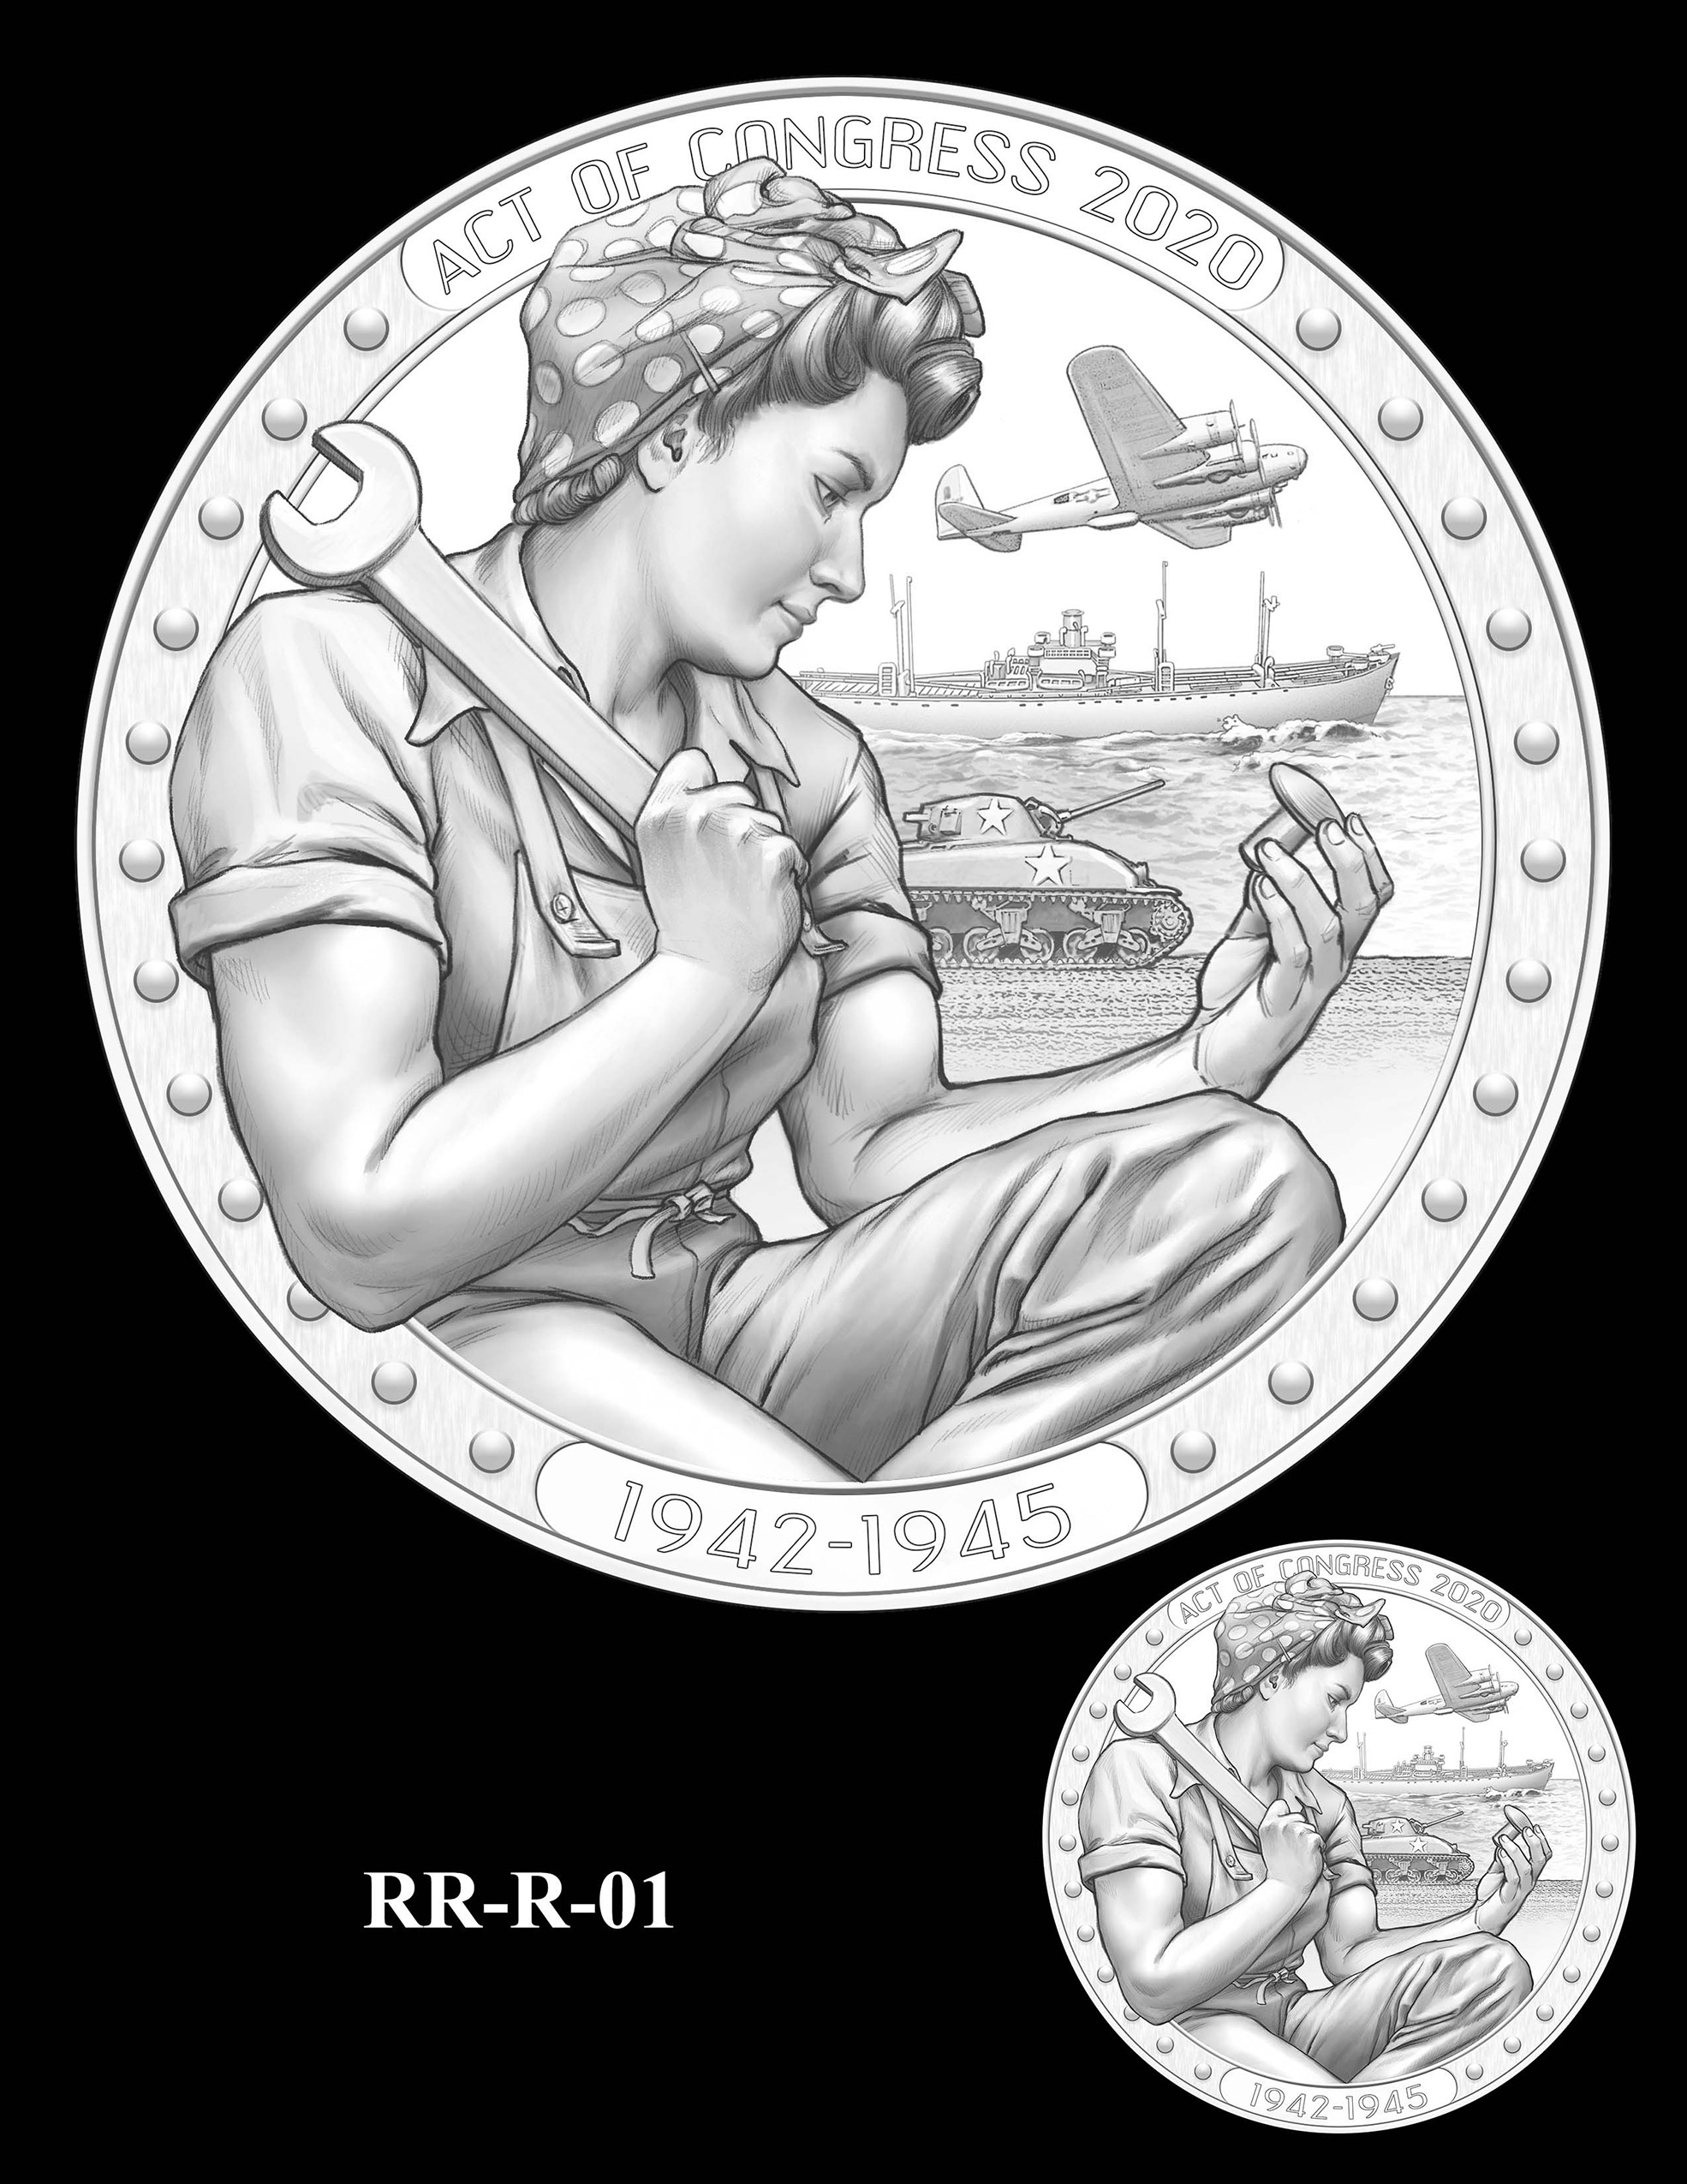 RR-R-01 -- Rosie the Riveter Congressional Gold Medal